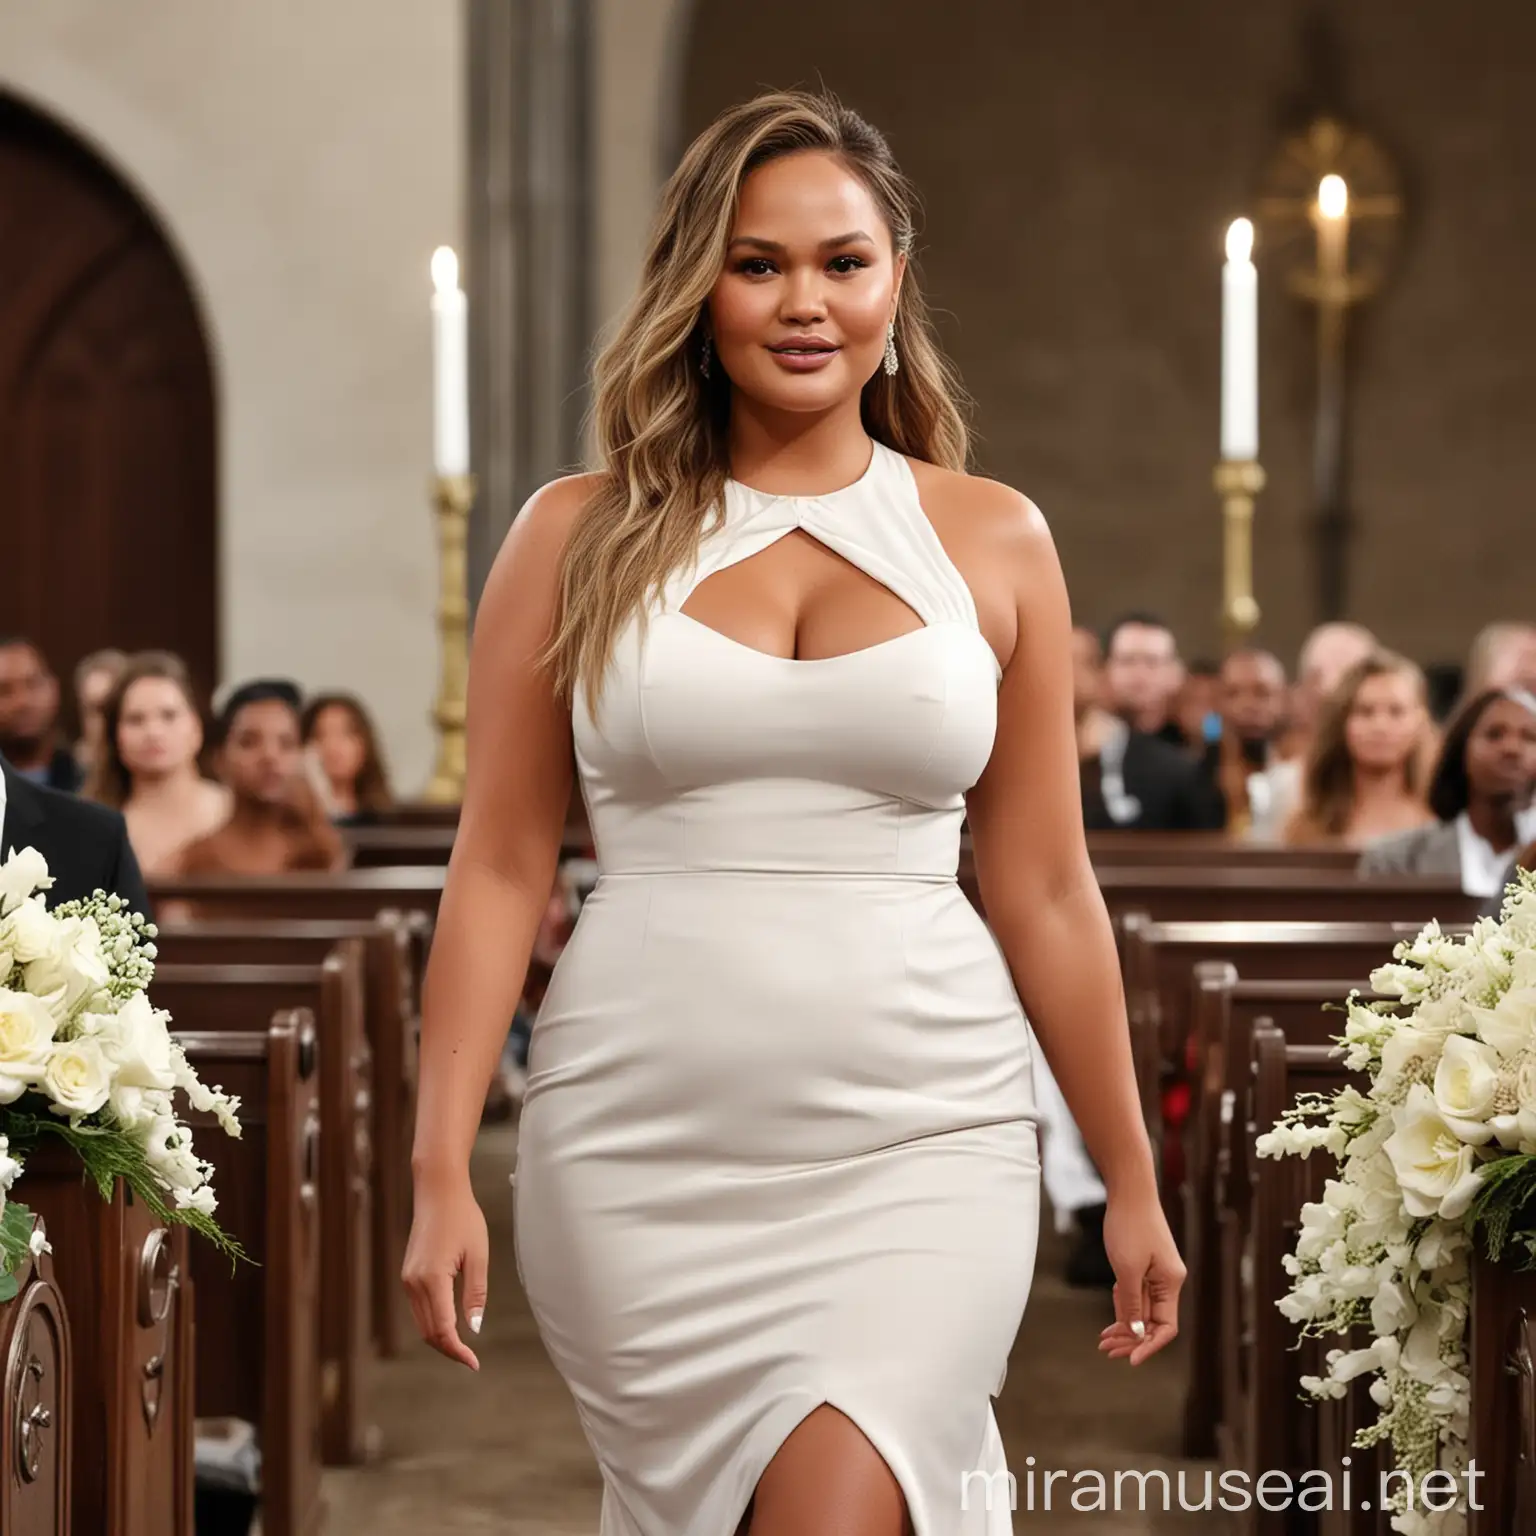 Chrissy Teigen in a short wedding dress in church, bbw, sleek straight hair, big giant breasts, showing massive, zoomed in from the waist up